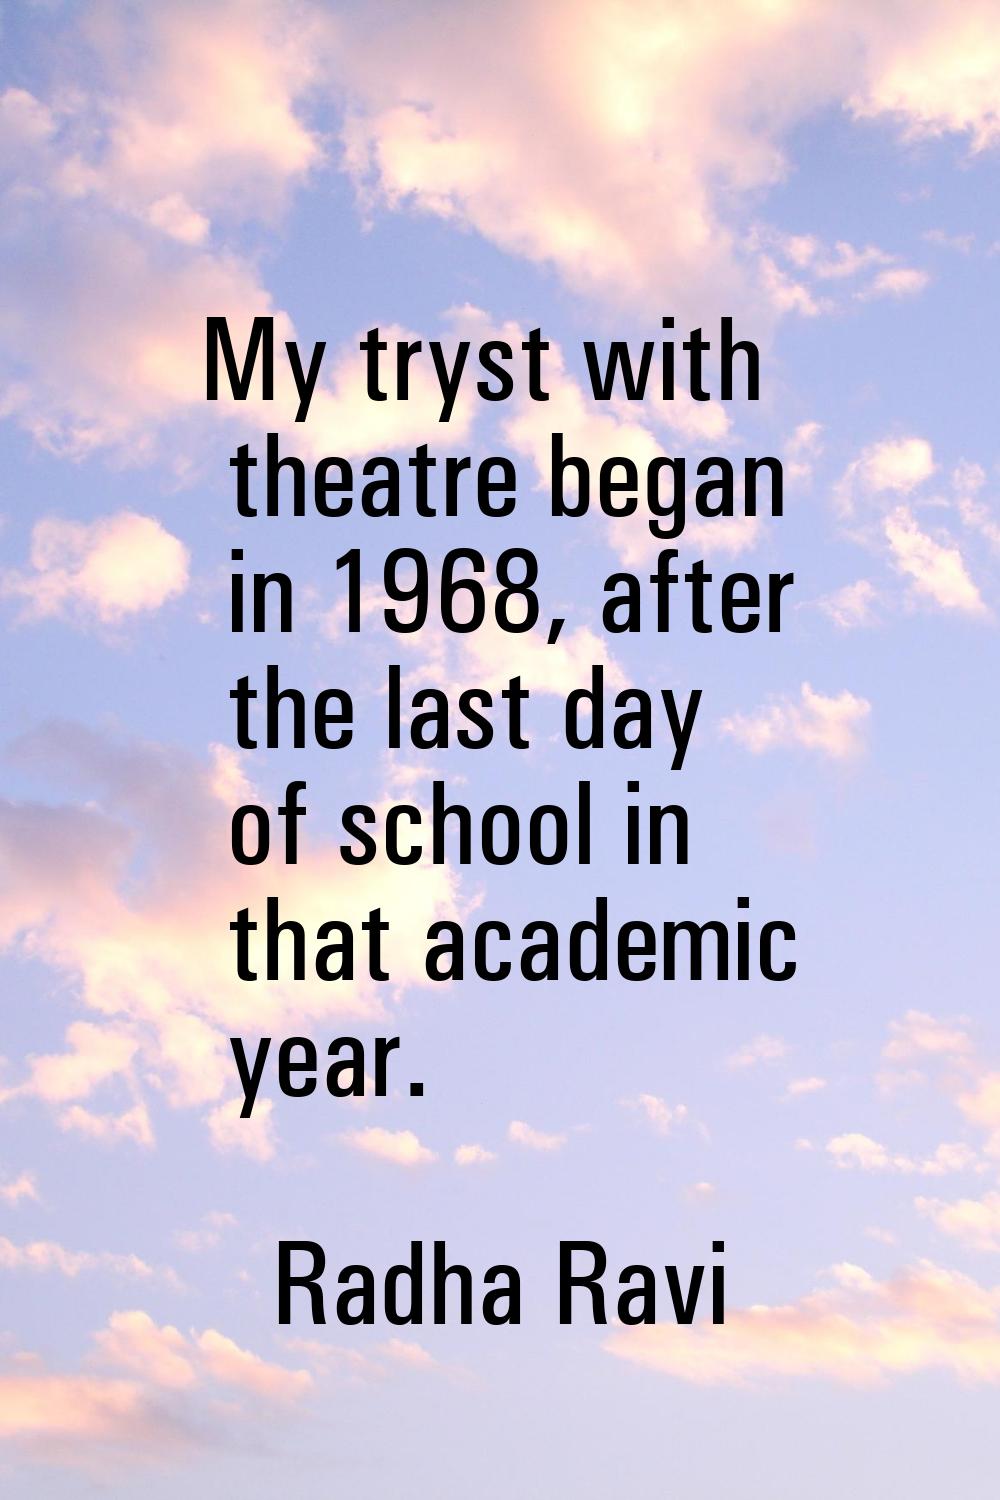 My tryst with theatre began in 1968, after the last day of school in that academic year.